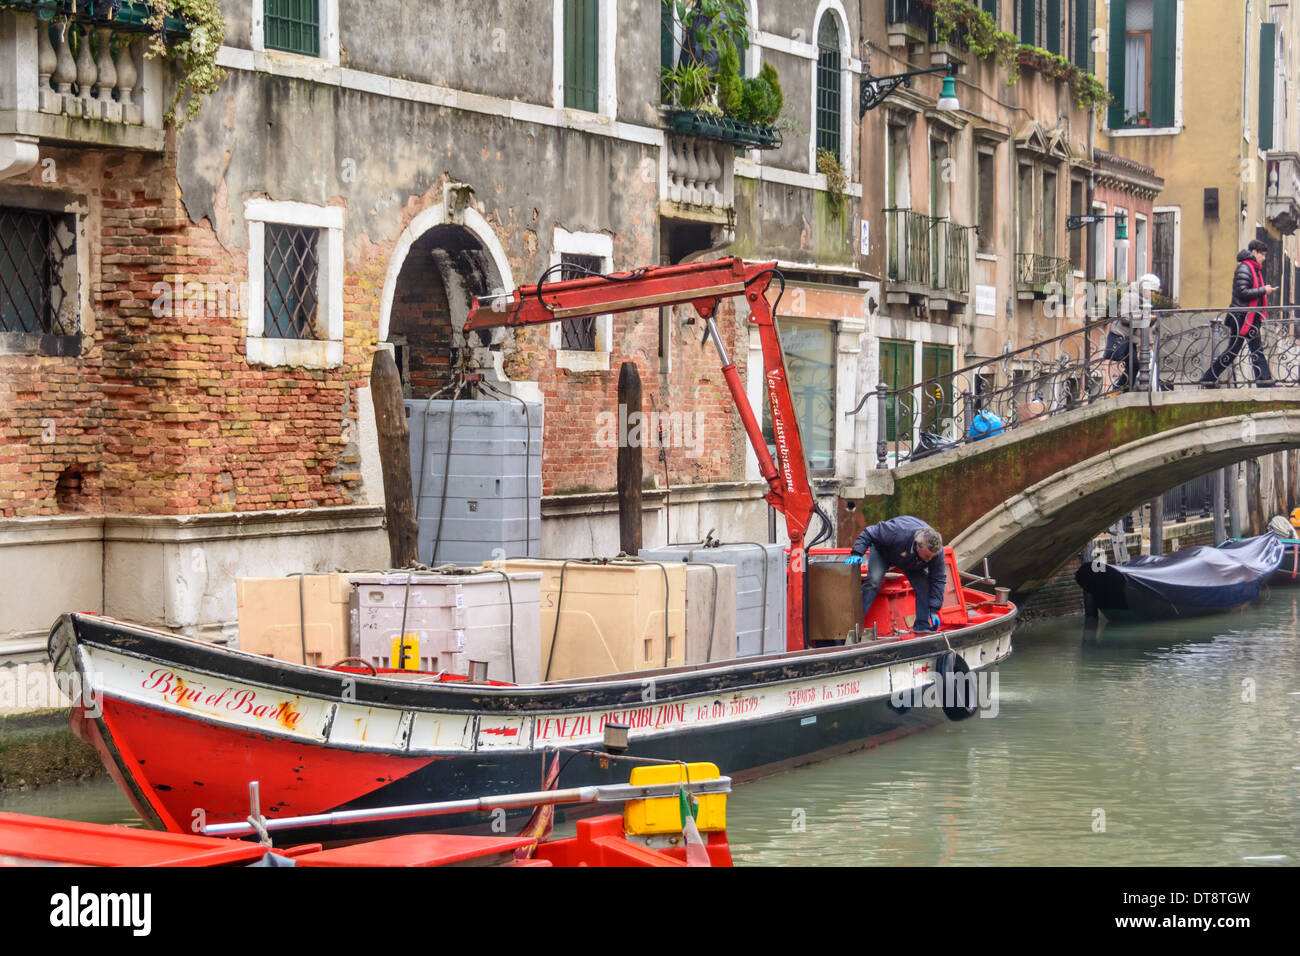 Venice, Italy. Freight-laden barge with mounted crane in a narrow Venetian canal unloading containers. Stock Photo